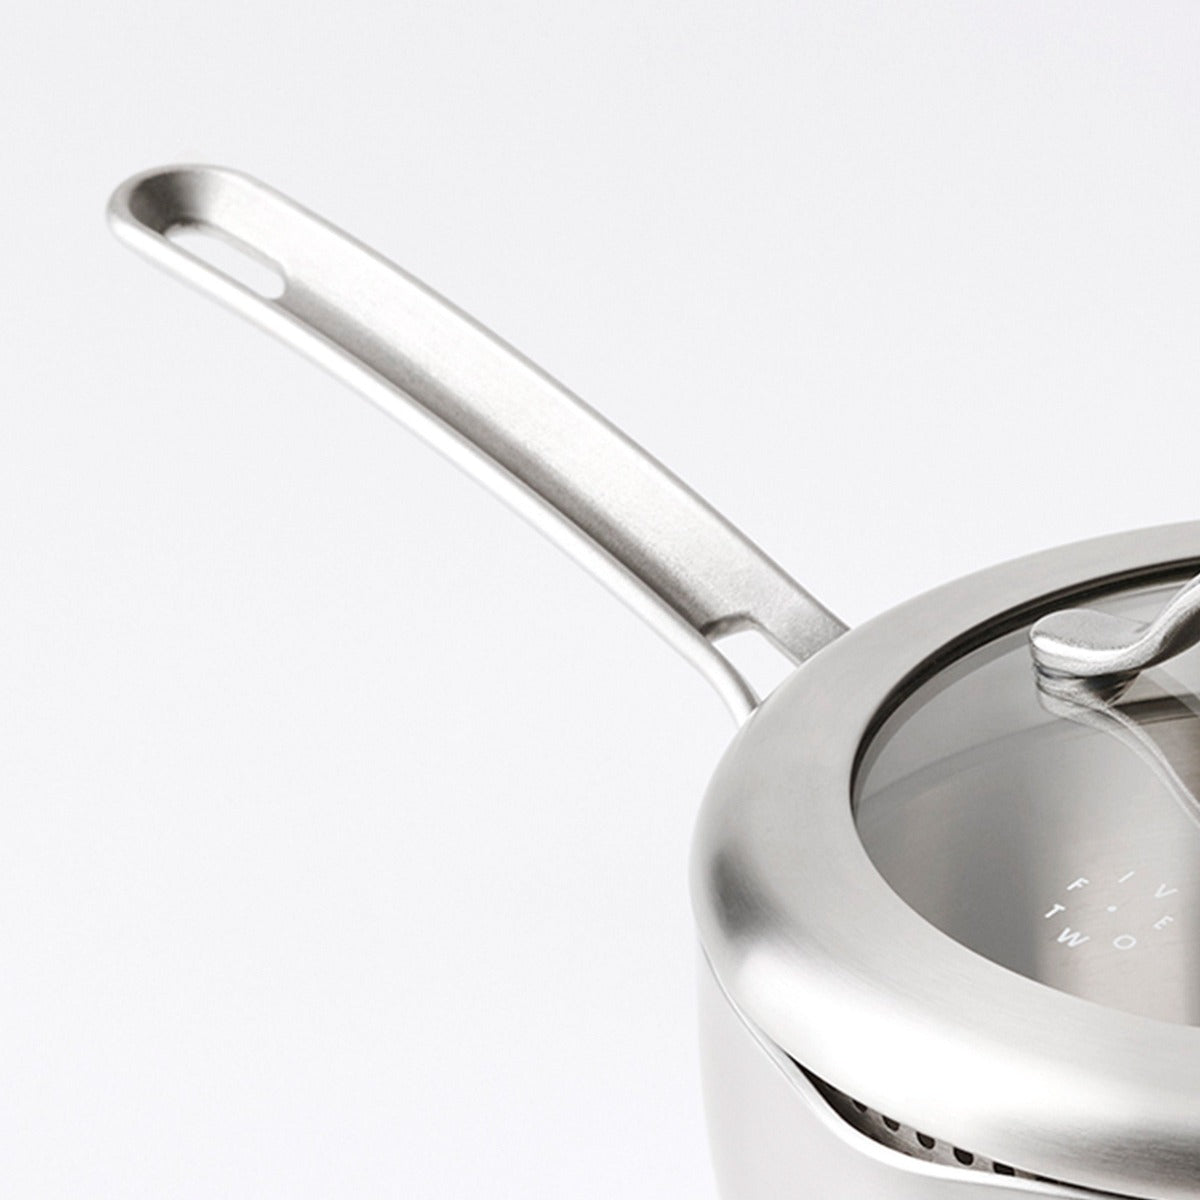 Stainless Steel Sauce Pan with Lid